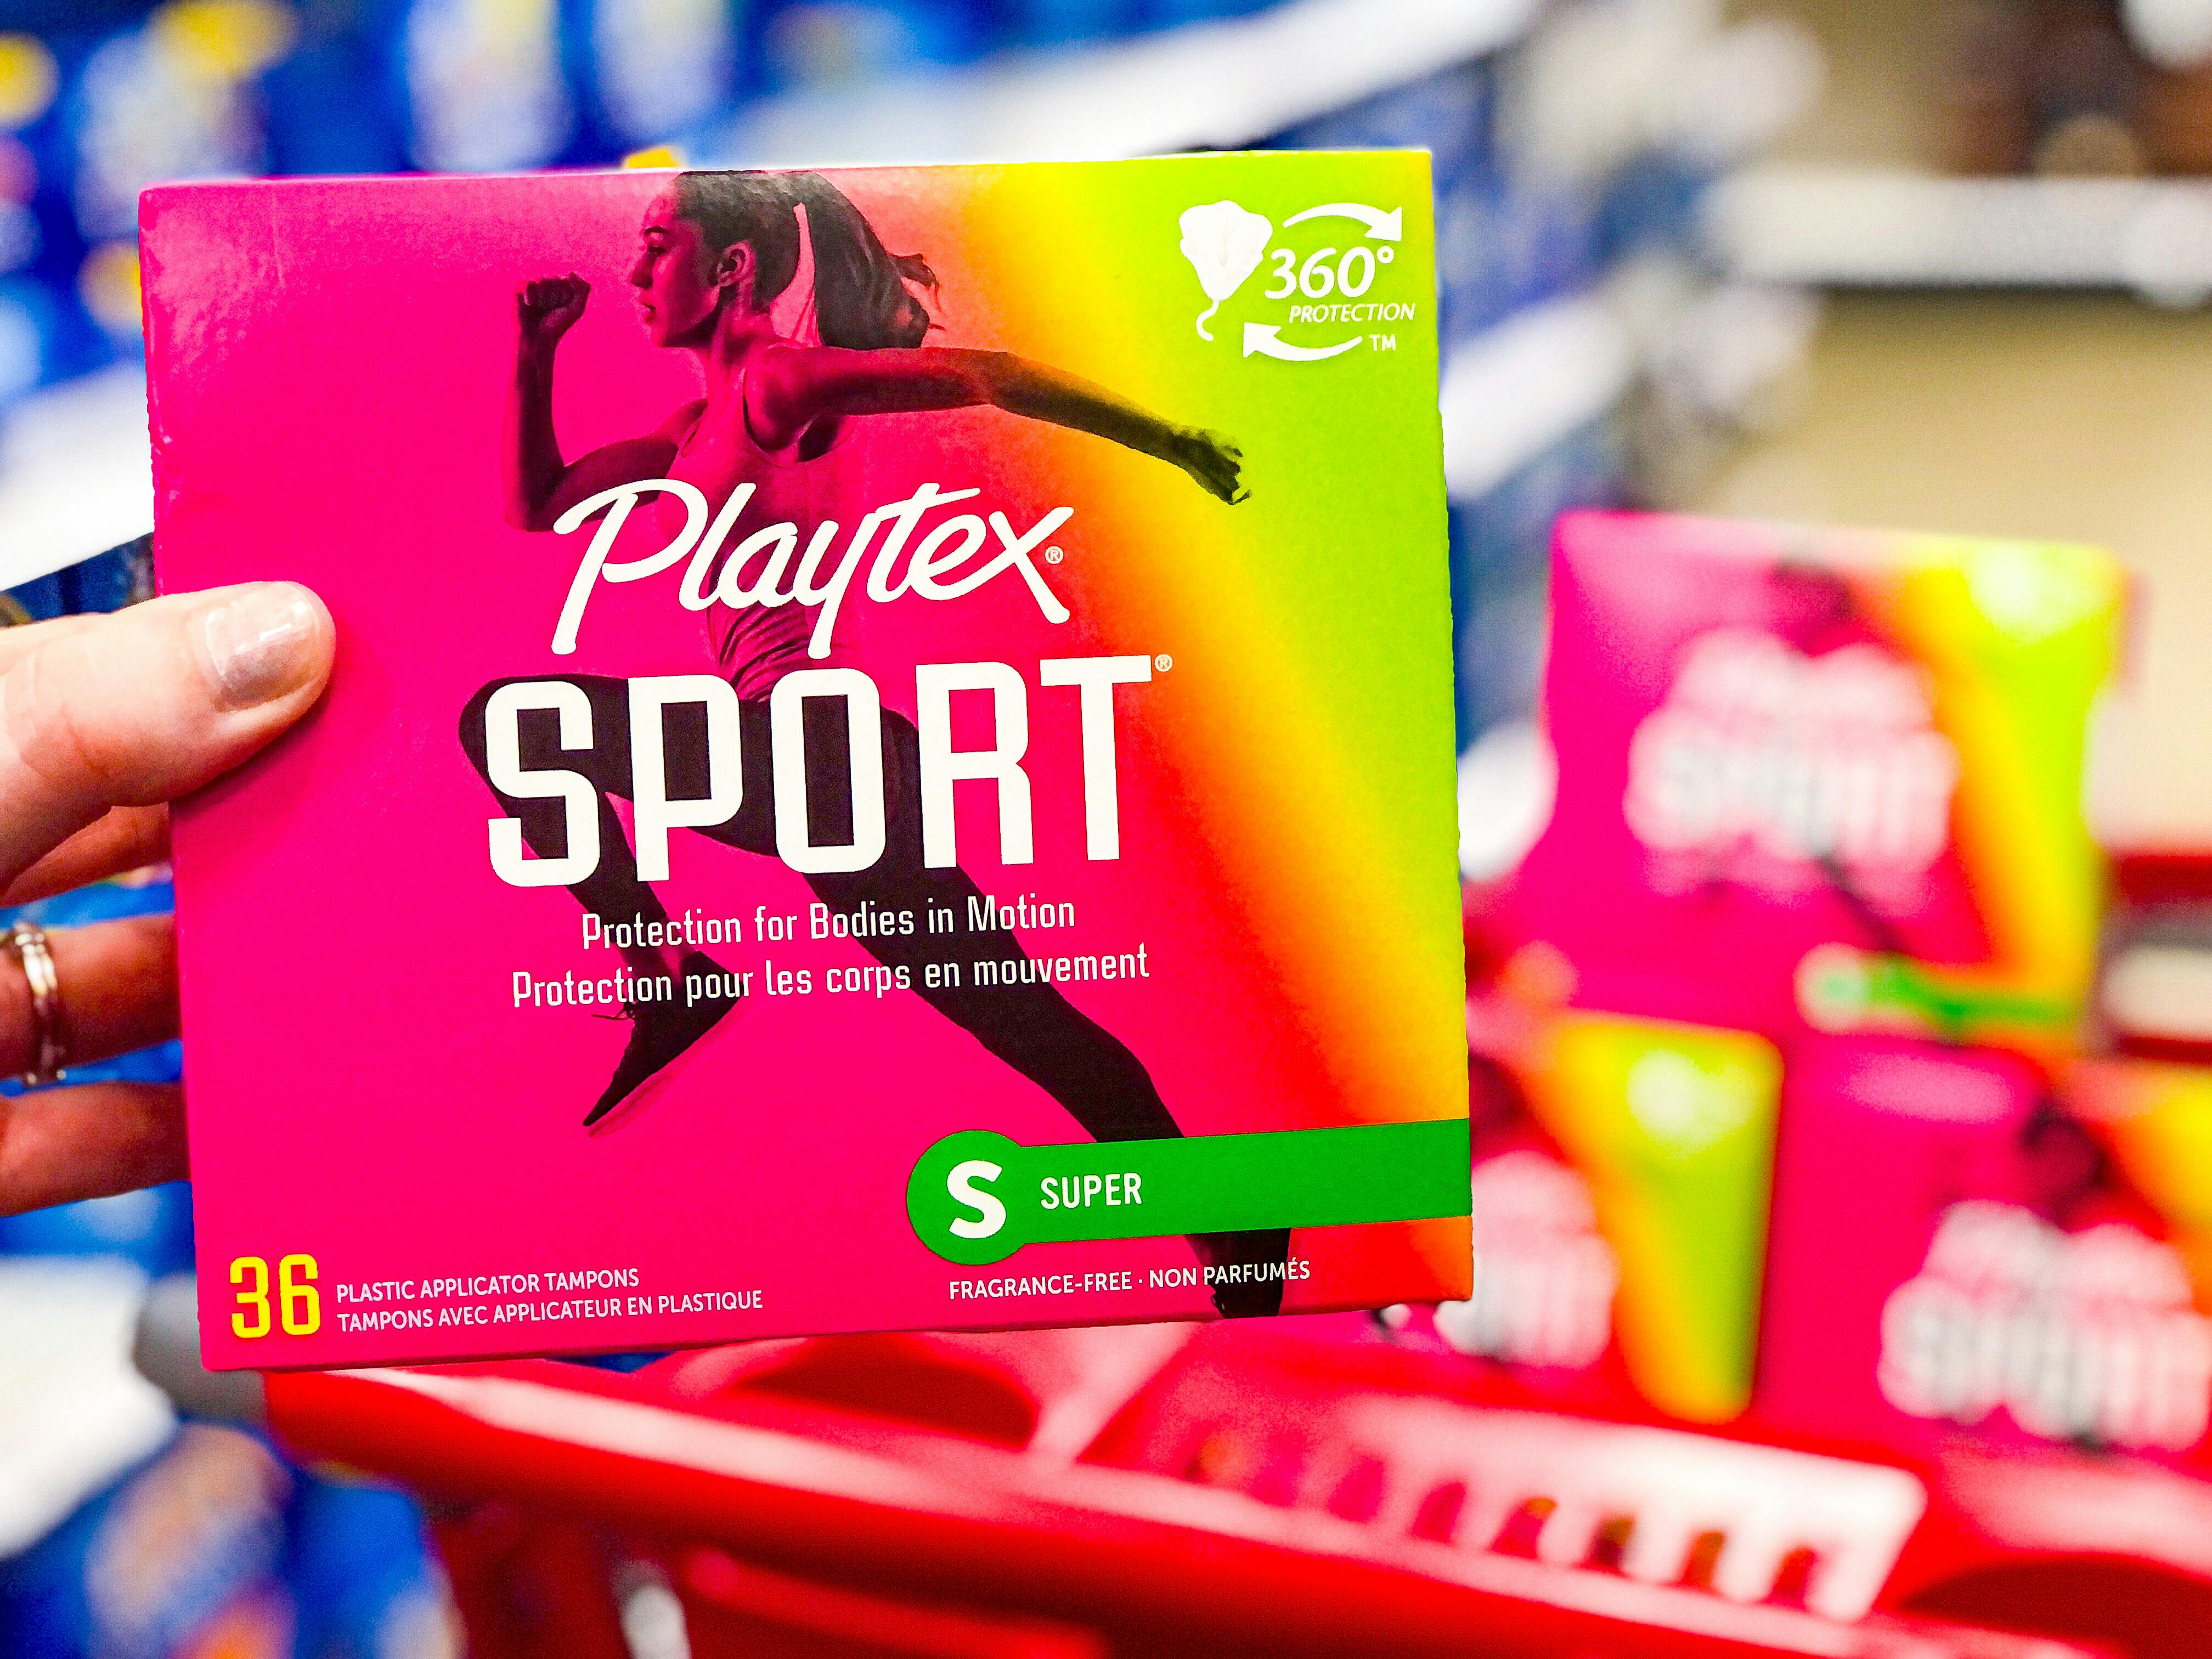 High Value $2/1 Playtex Sport Tampon Coupon = Only $2.99 Per 36-Count Box  at Target